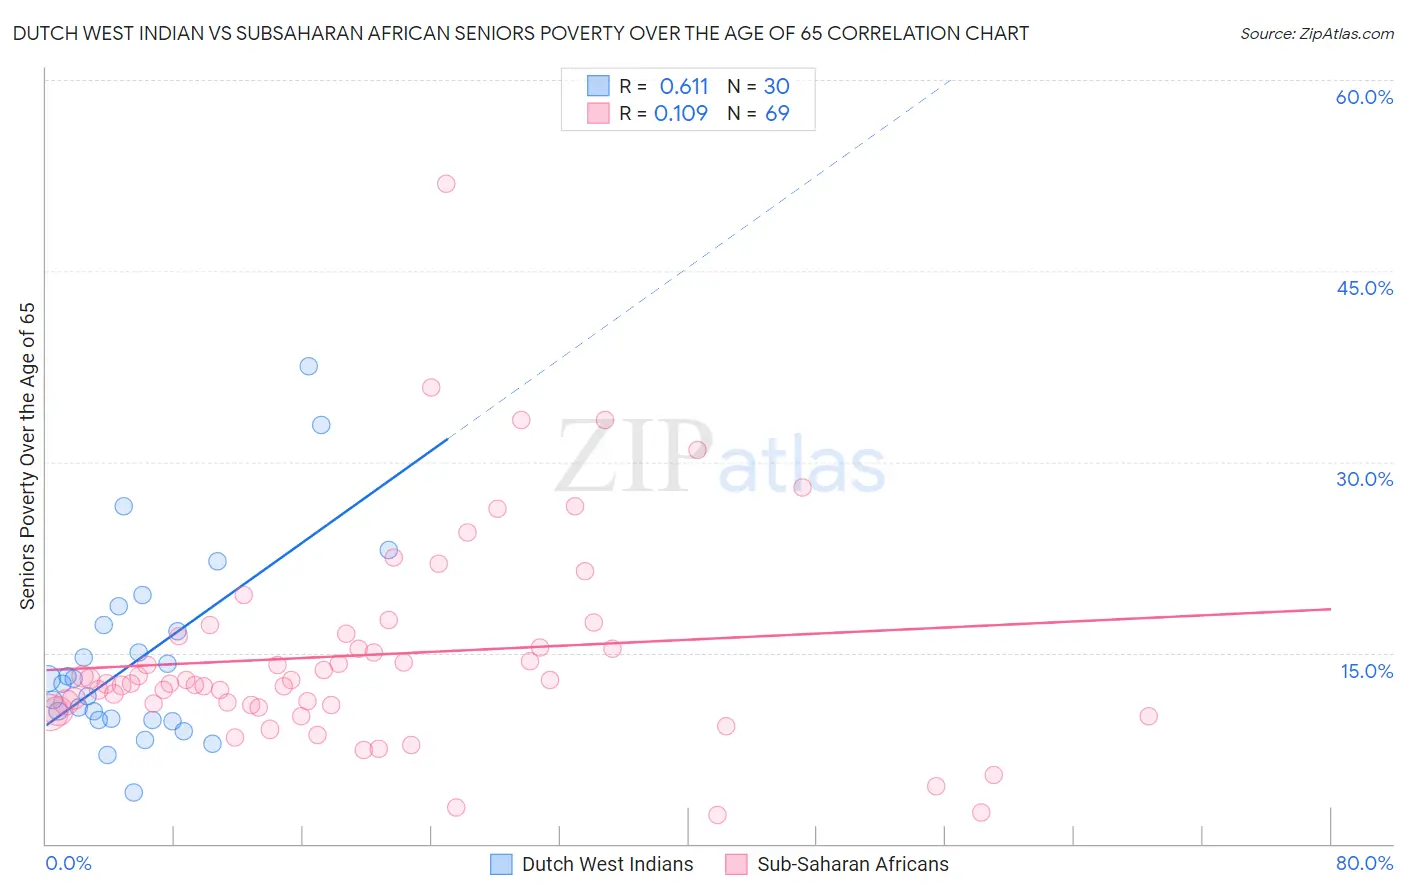 Dutch West Indian vs Subsaharan African Seniors Poverty Over the Age of 65